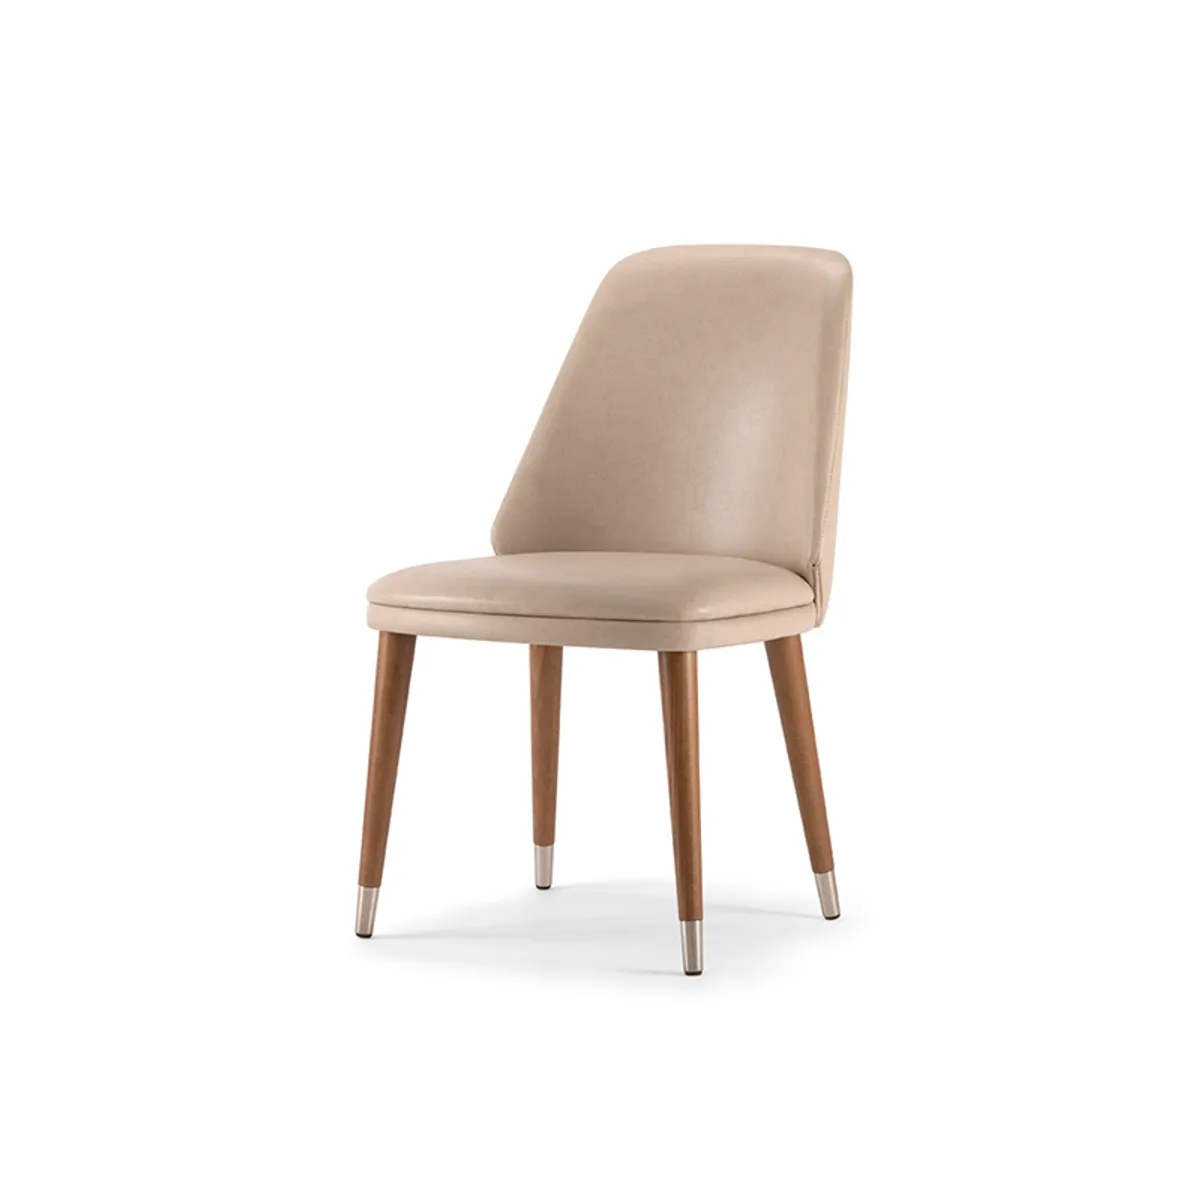 Barton Side Chair Upholstered Chair With Wooden Legs And Metal Slipper Cups Insideoutcontracts074 2